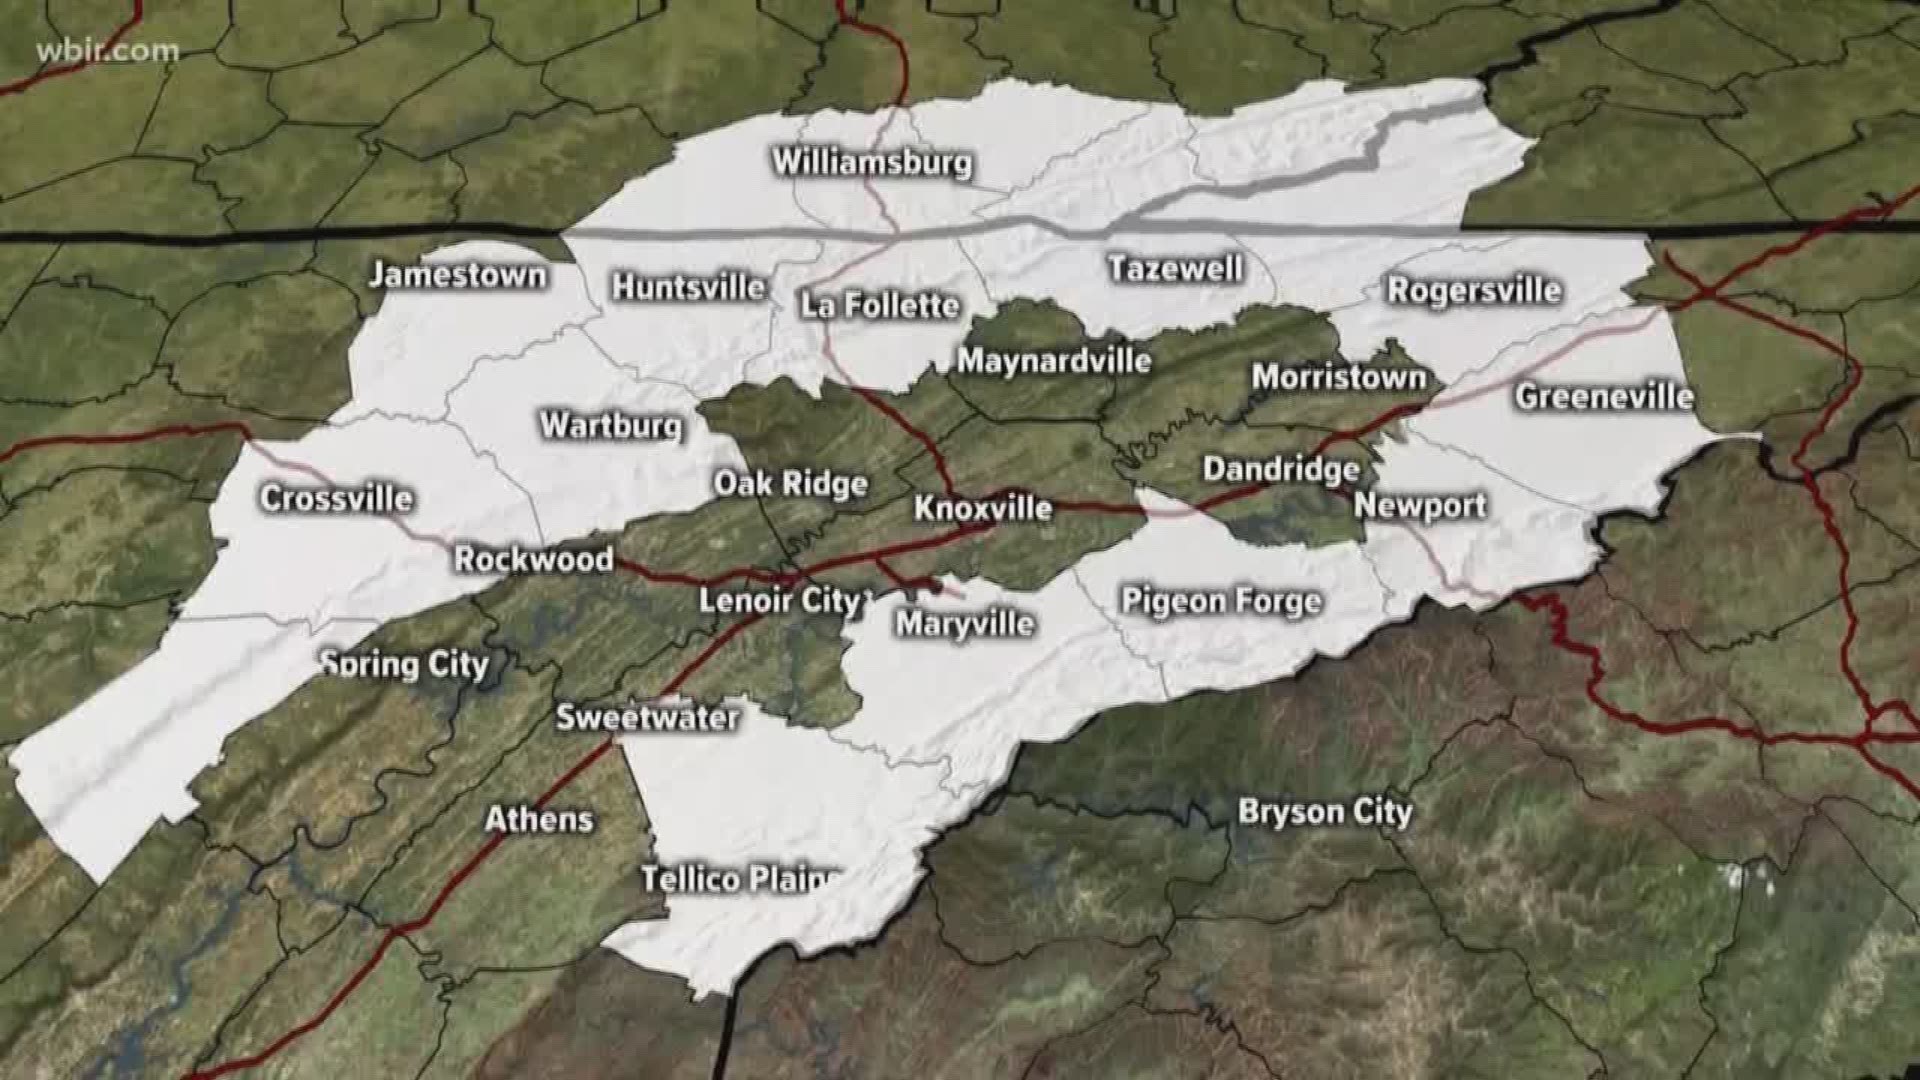 Our 10News Weather team breaks down the areas most likely to see snow pile up.